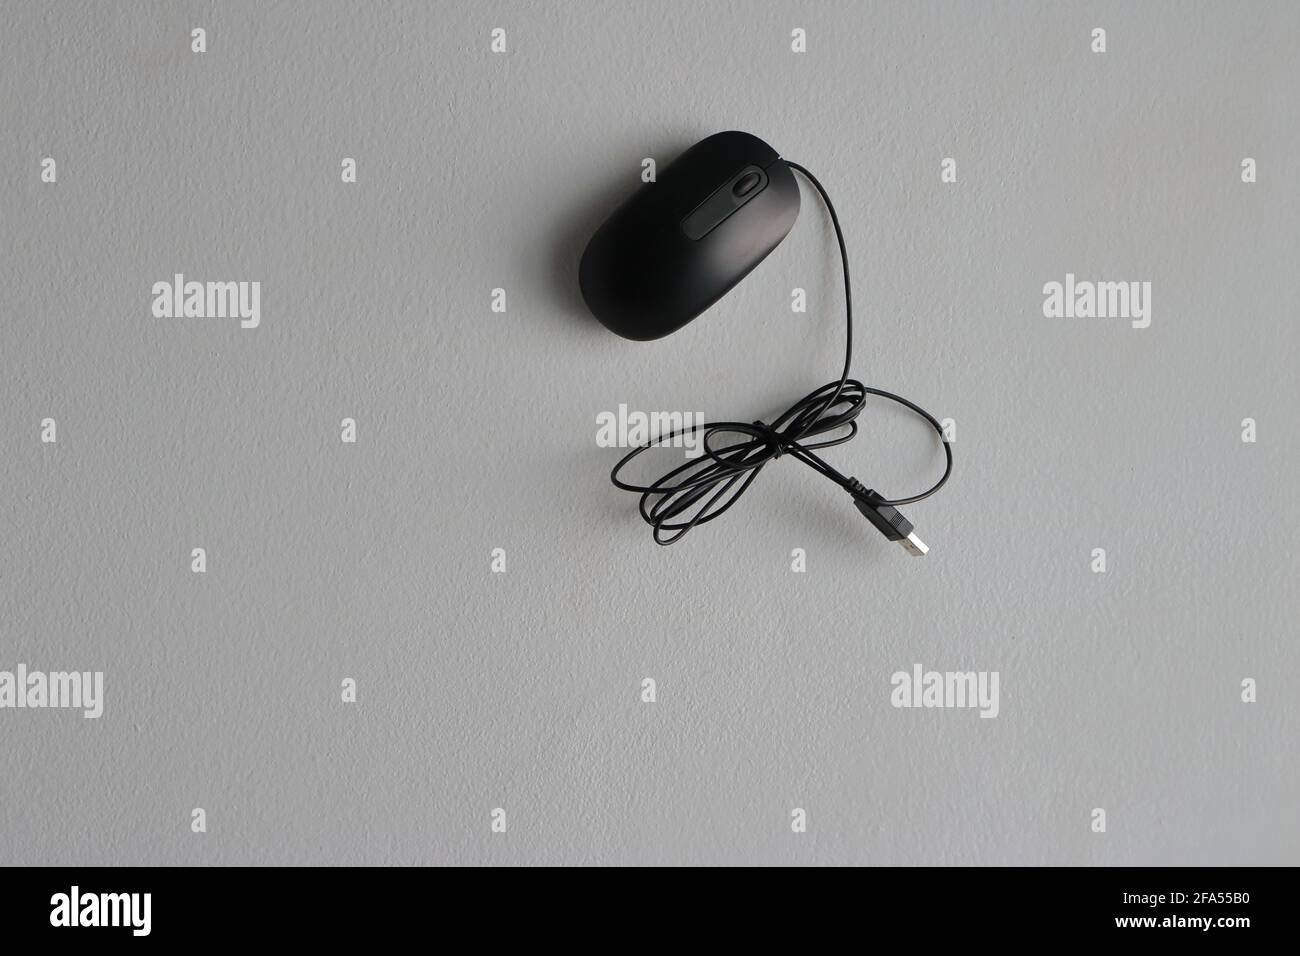 Closeup black minimalist mouse attached to white cement wall Stock Photo